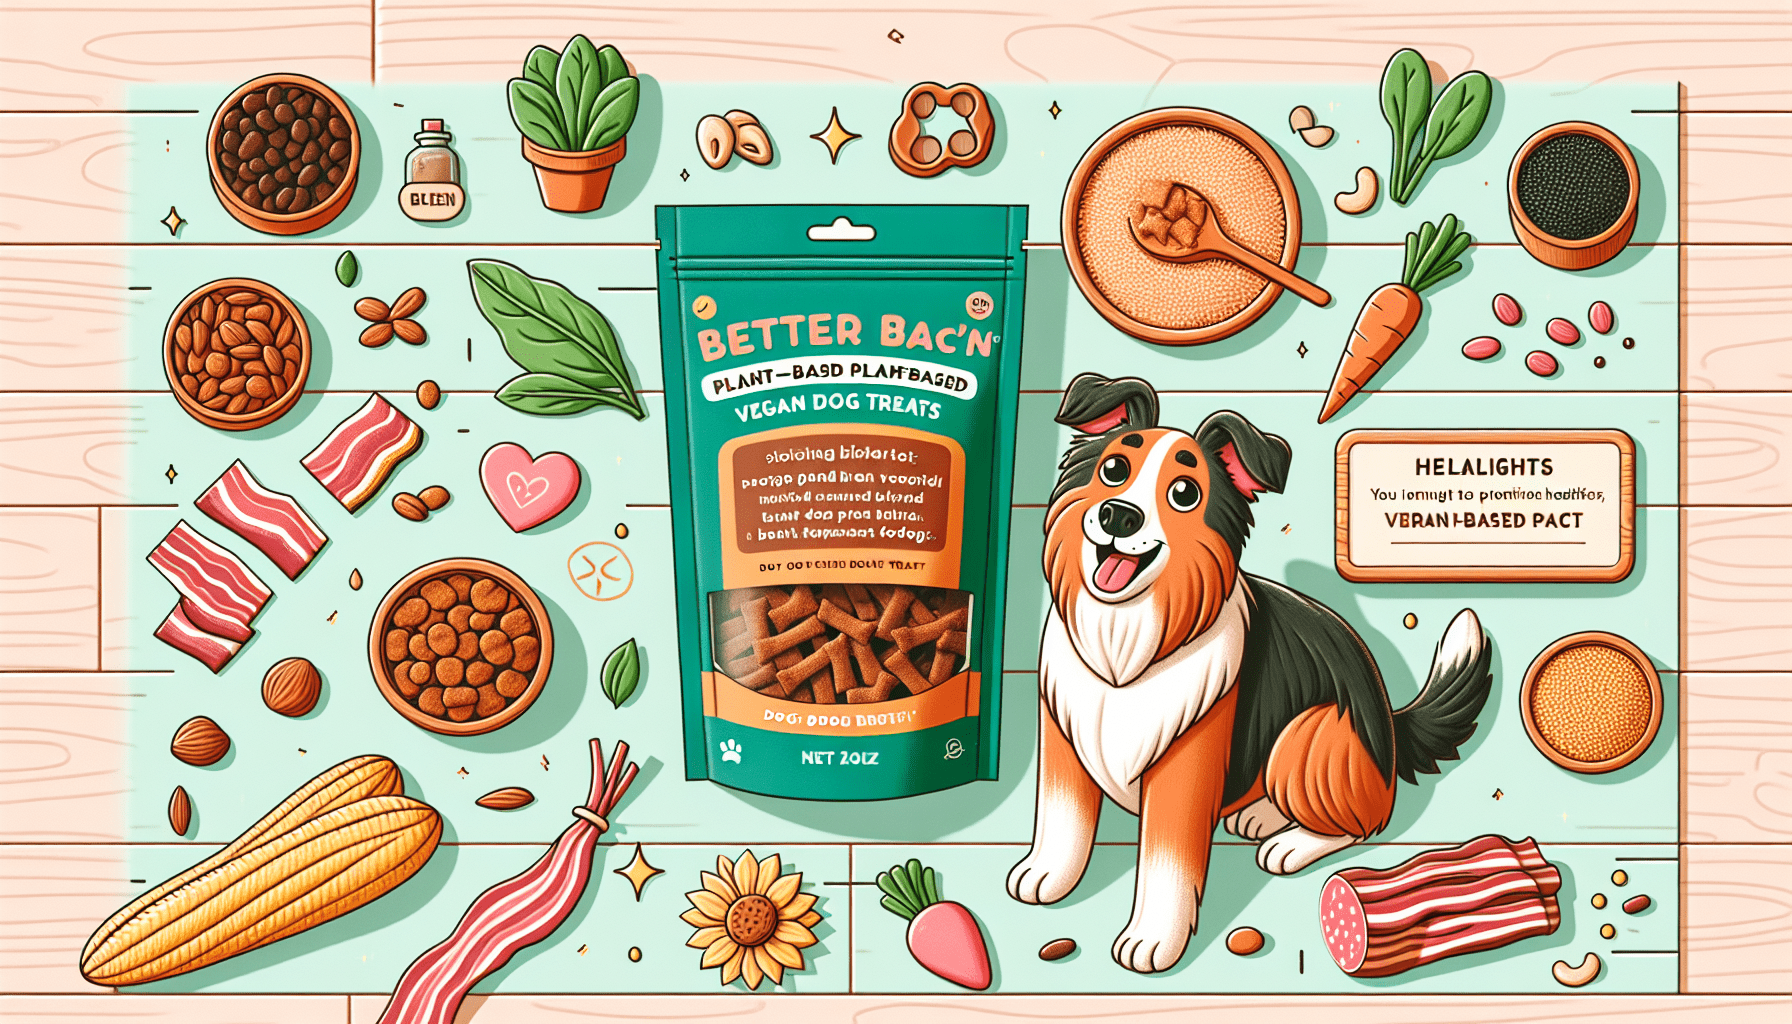 better bacn plant based vegan dog treats 6oz sustainable natural clean label hypoallergenic allergy friendly low calorie